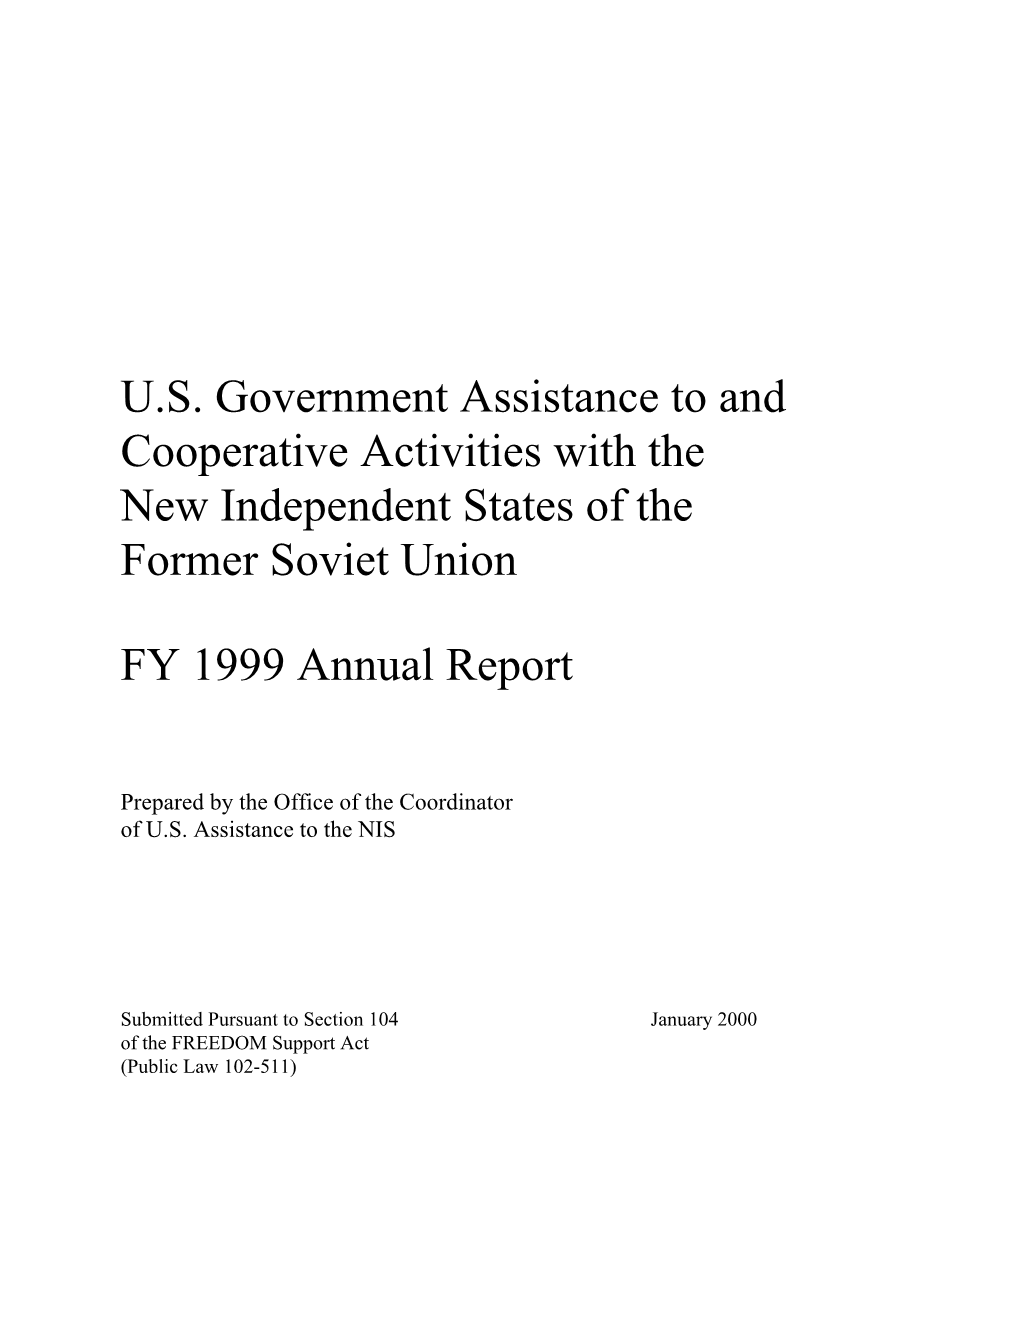 U.S. Government Assistance to and Cooperative Activities with the New Independent States of the Former Soviet Union